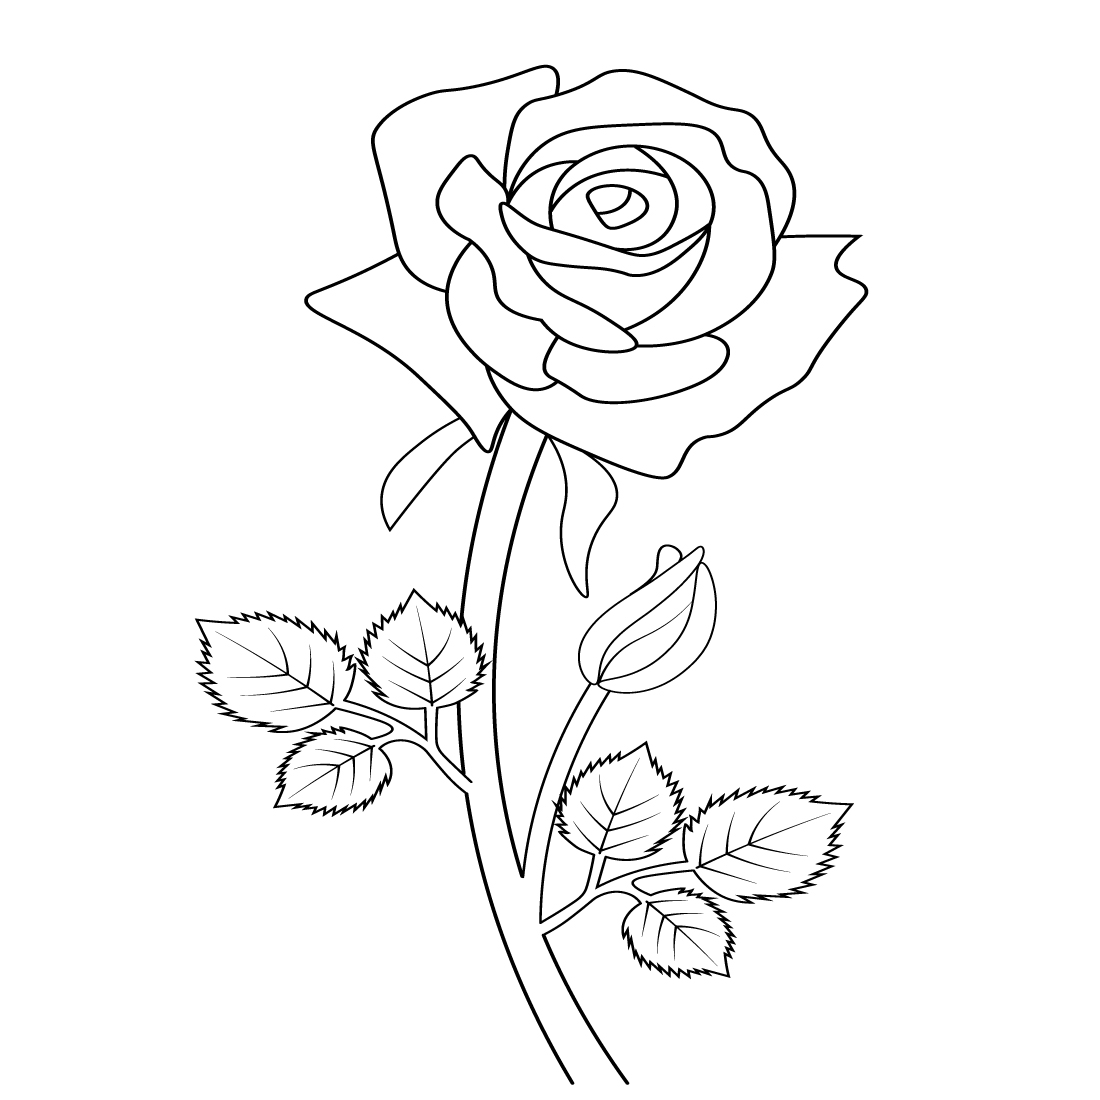 How To Draw A Rose Step By Step: Pencil Sketch Rose Drawing - YouTube-saigonsouth.com.vn